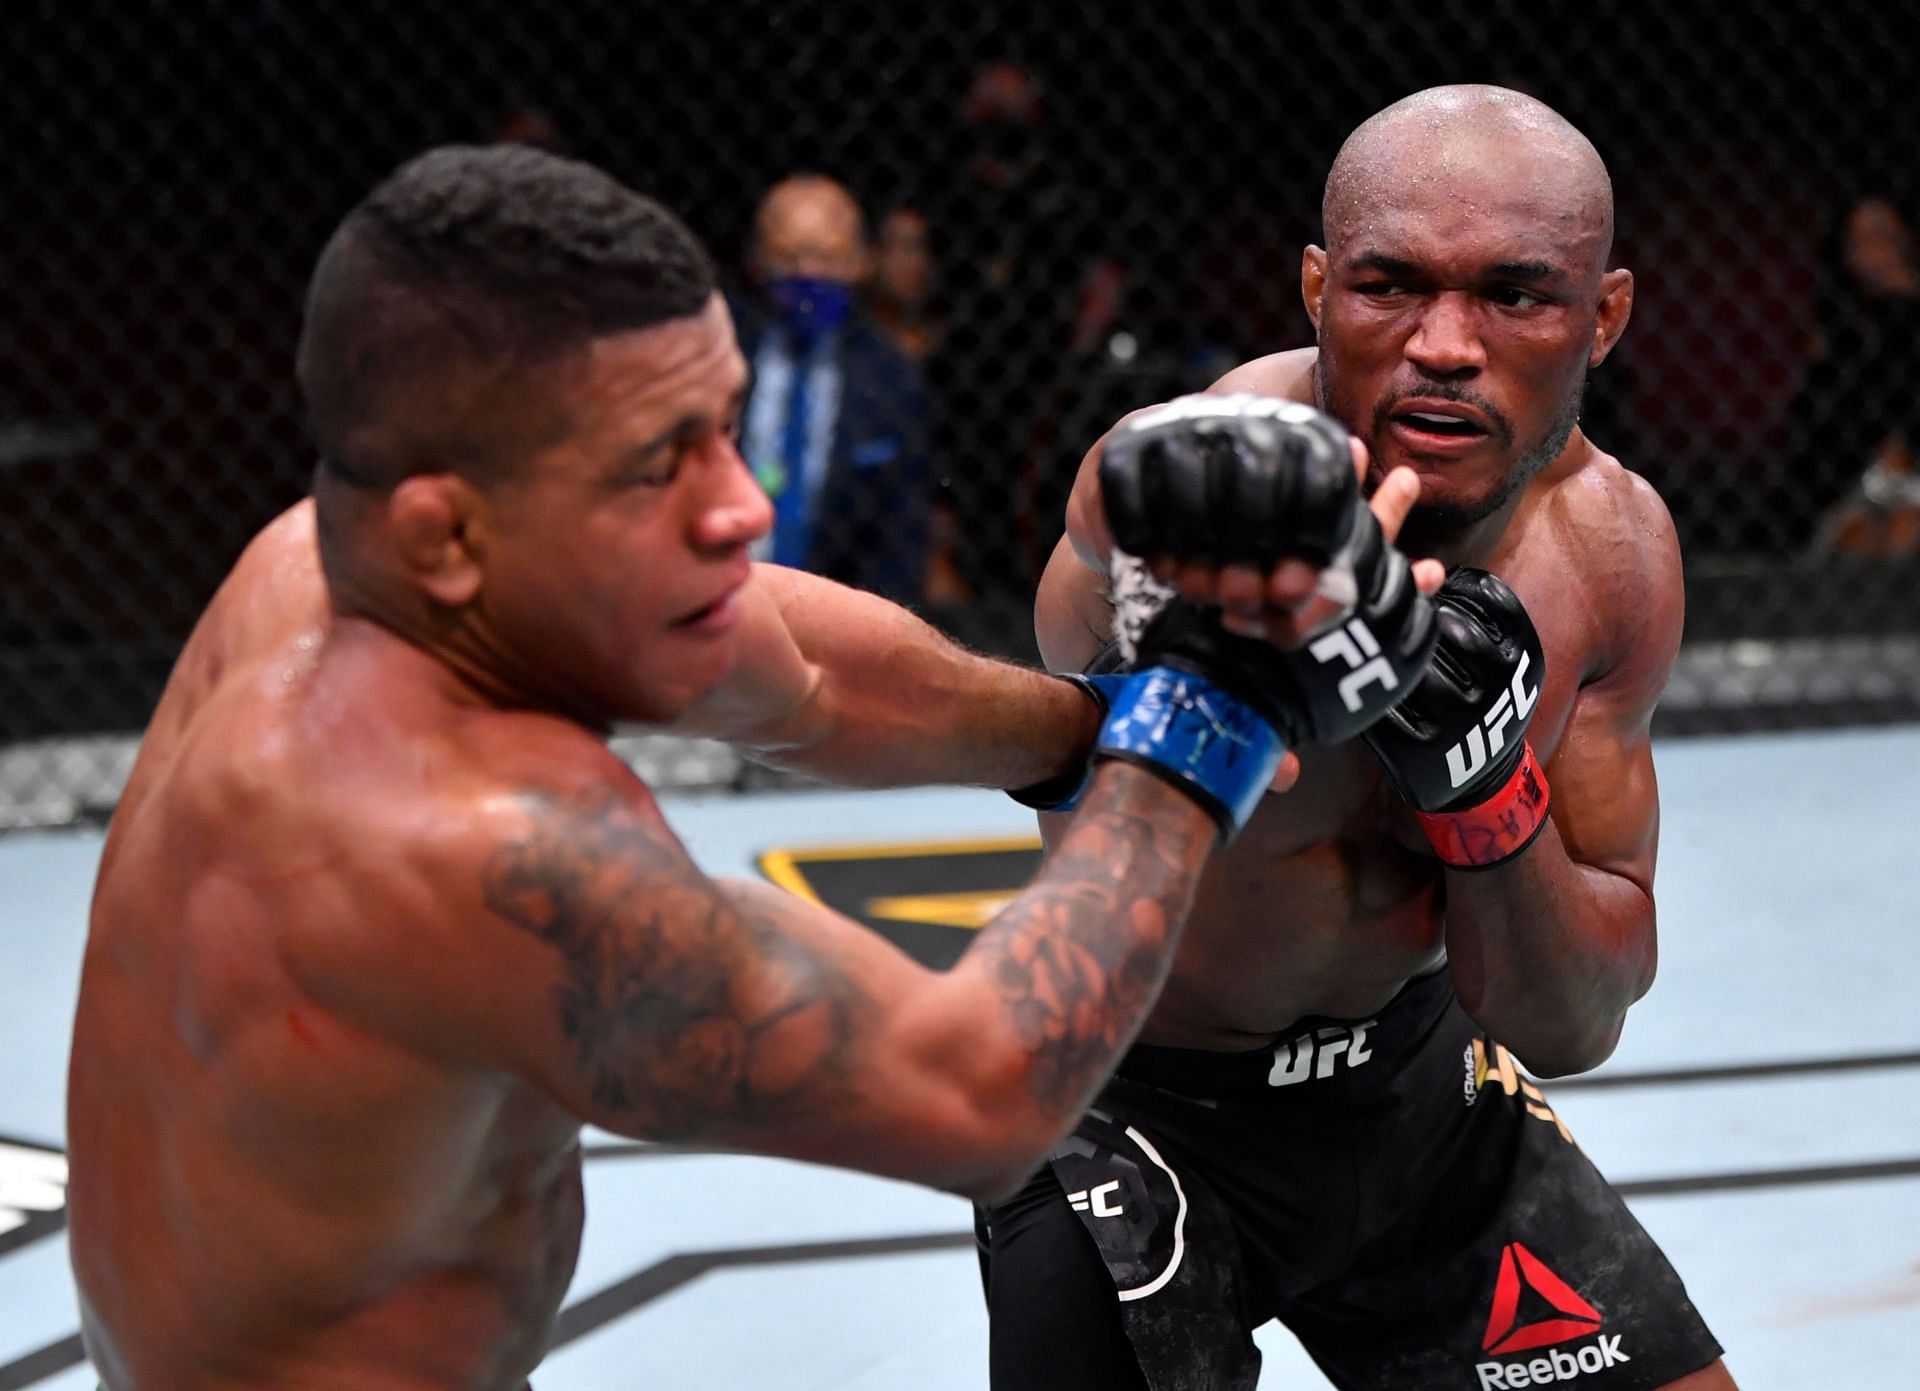 Training partners Kamaru Usman and Gilbert Burns remained respectful going into their UFC title fight in 2021